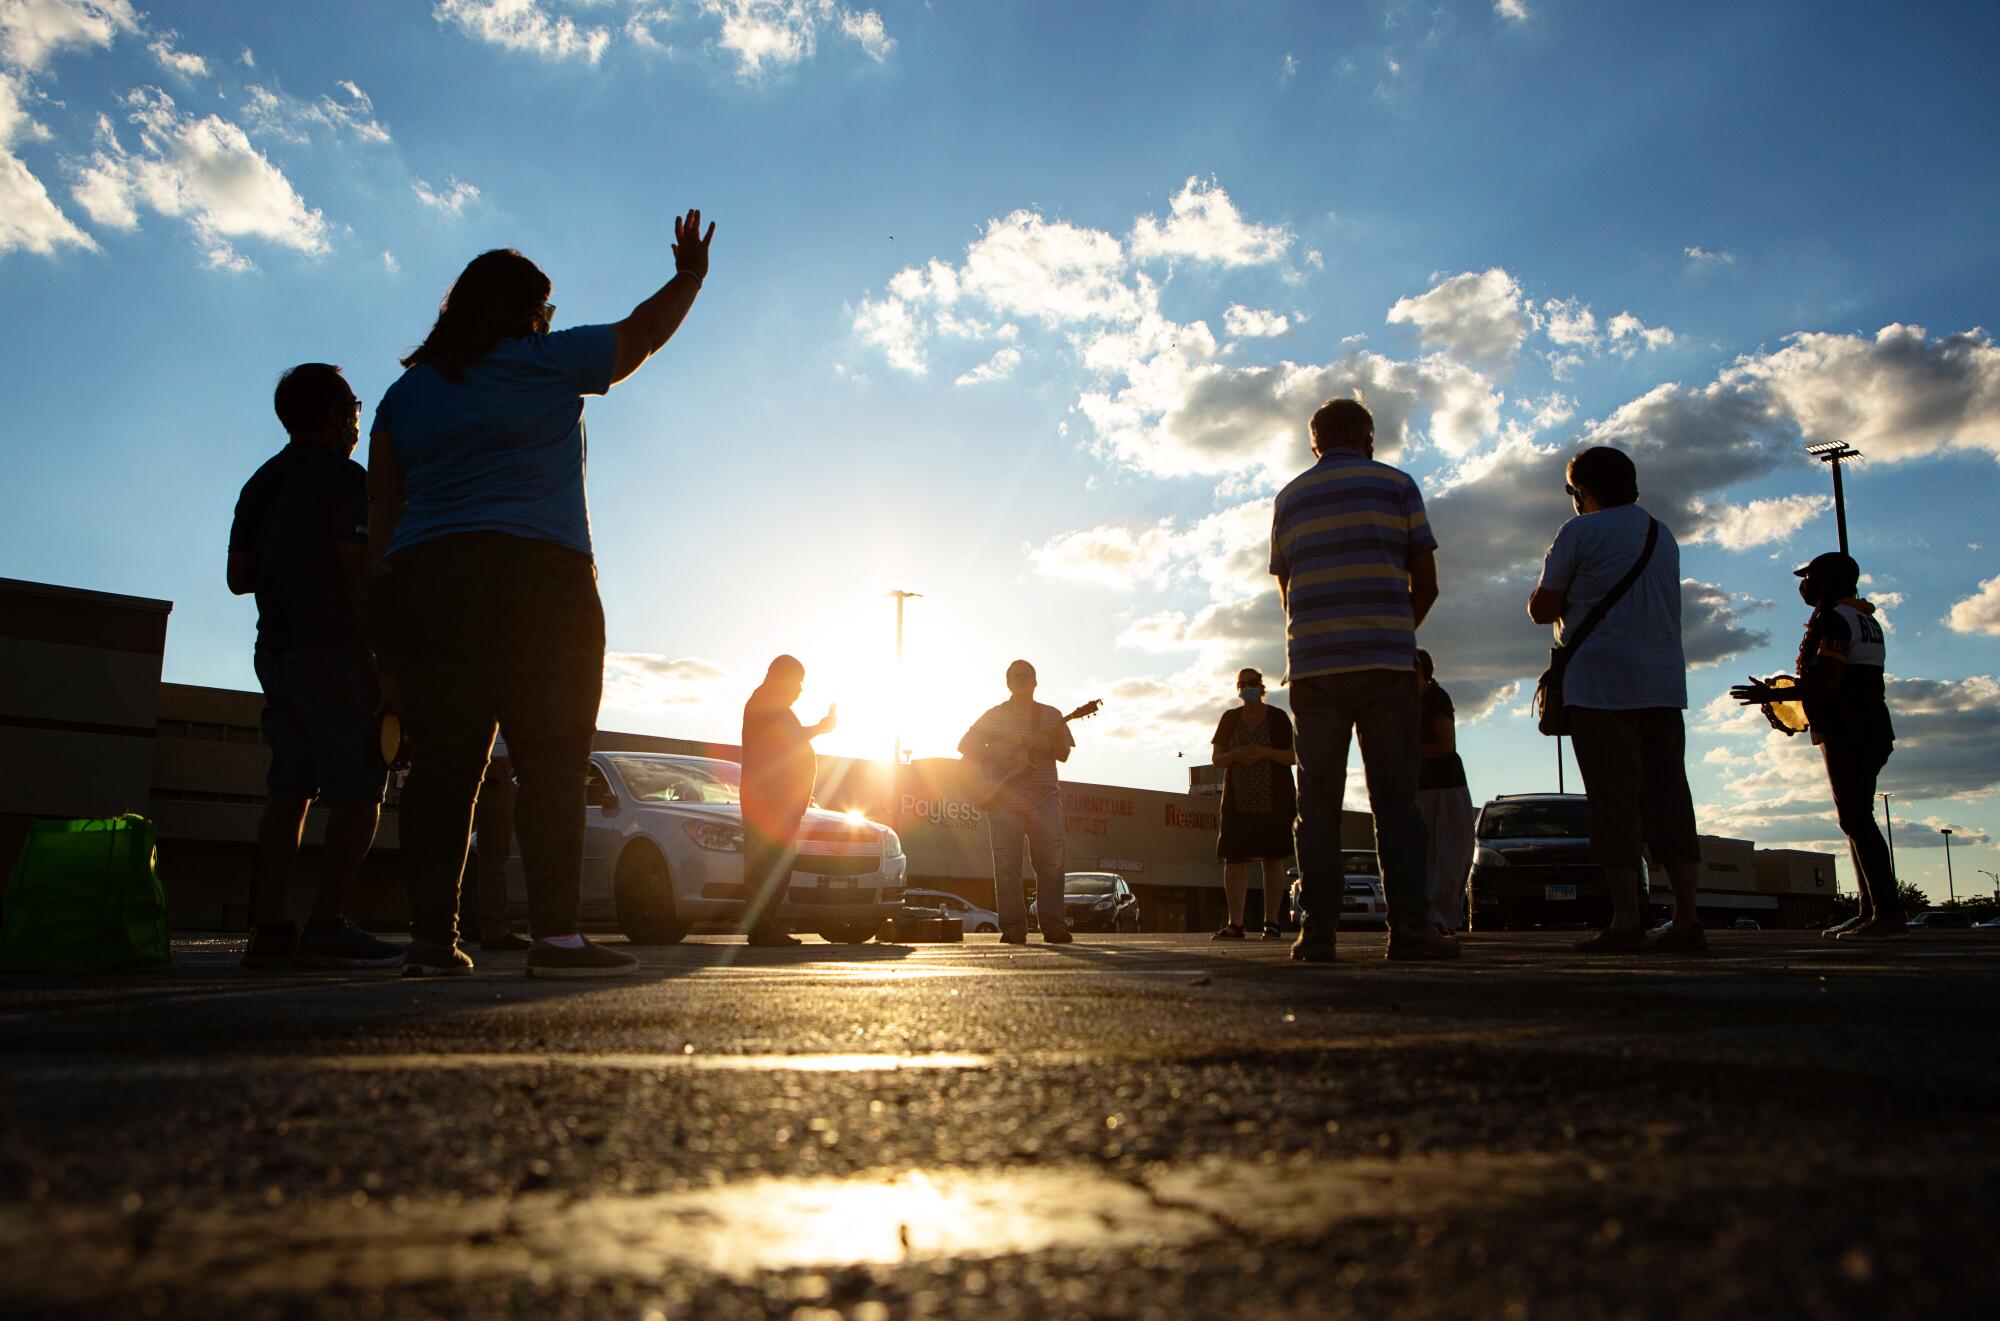 Donovan Price leads a prayer at a weekly service in a strip mall parking lot on Chicago's South Side.